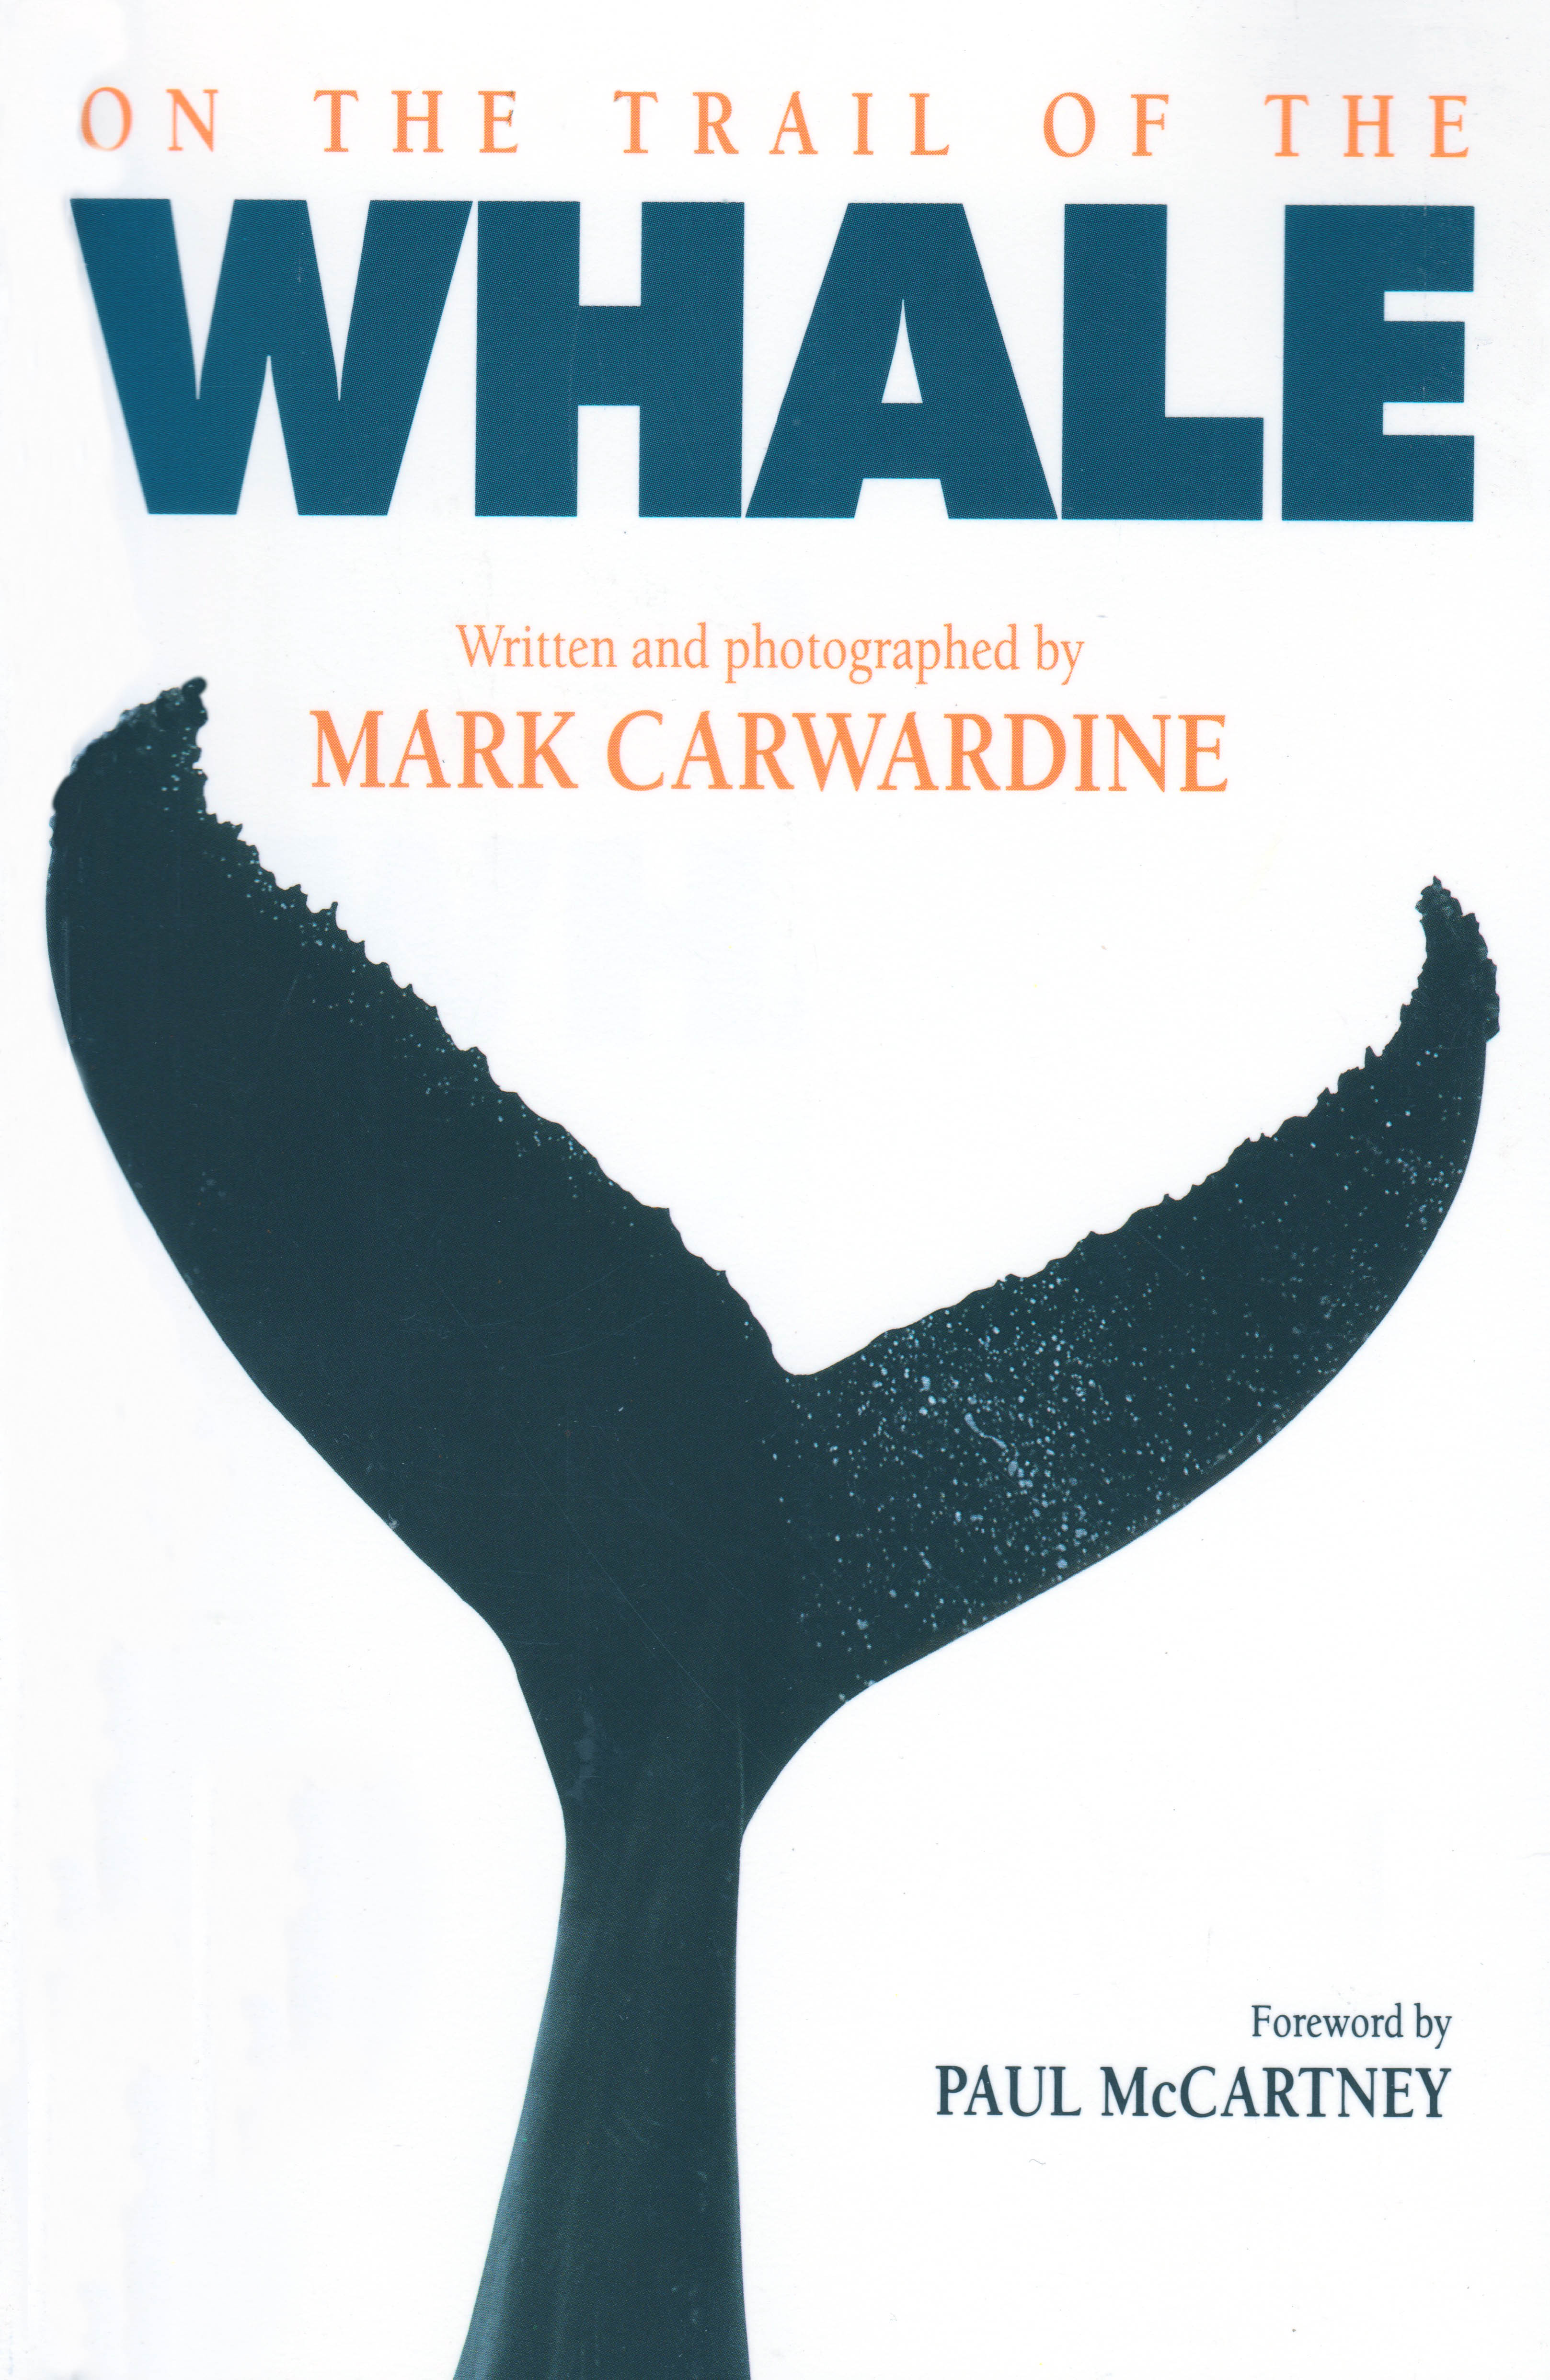 On the Trail of the Whale (with a foreword by Paul McCartney)